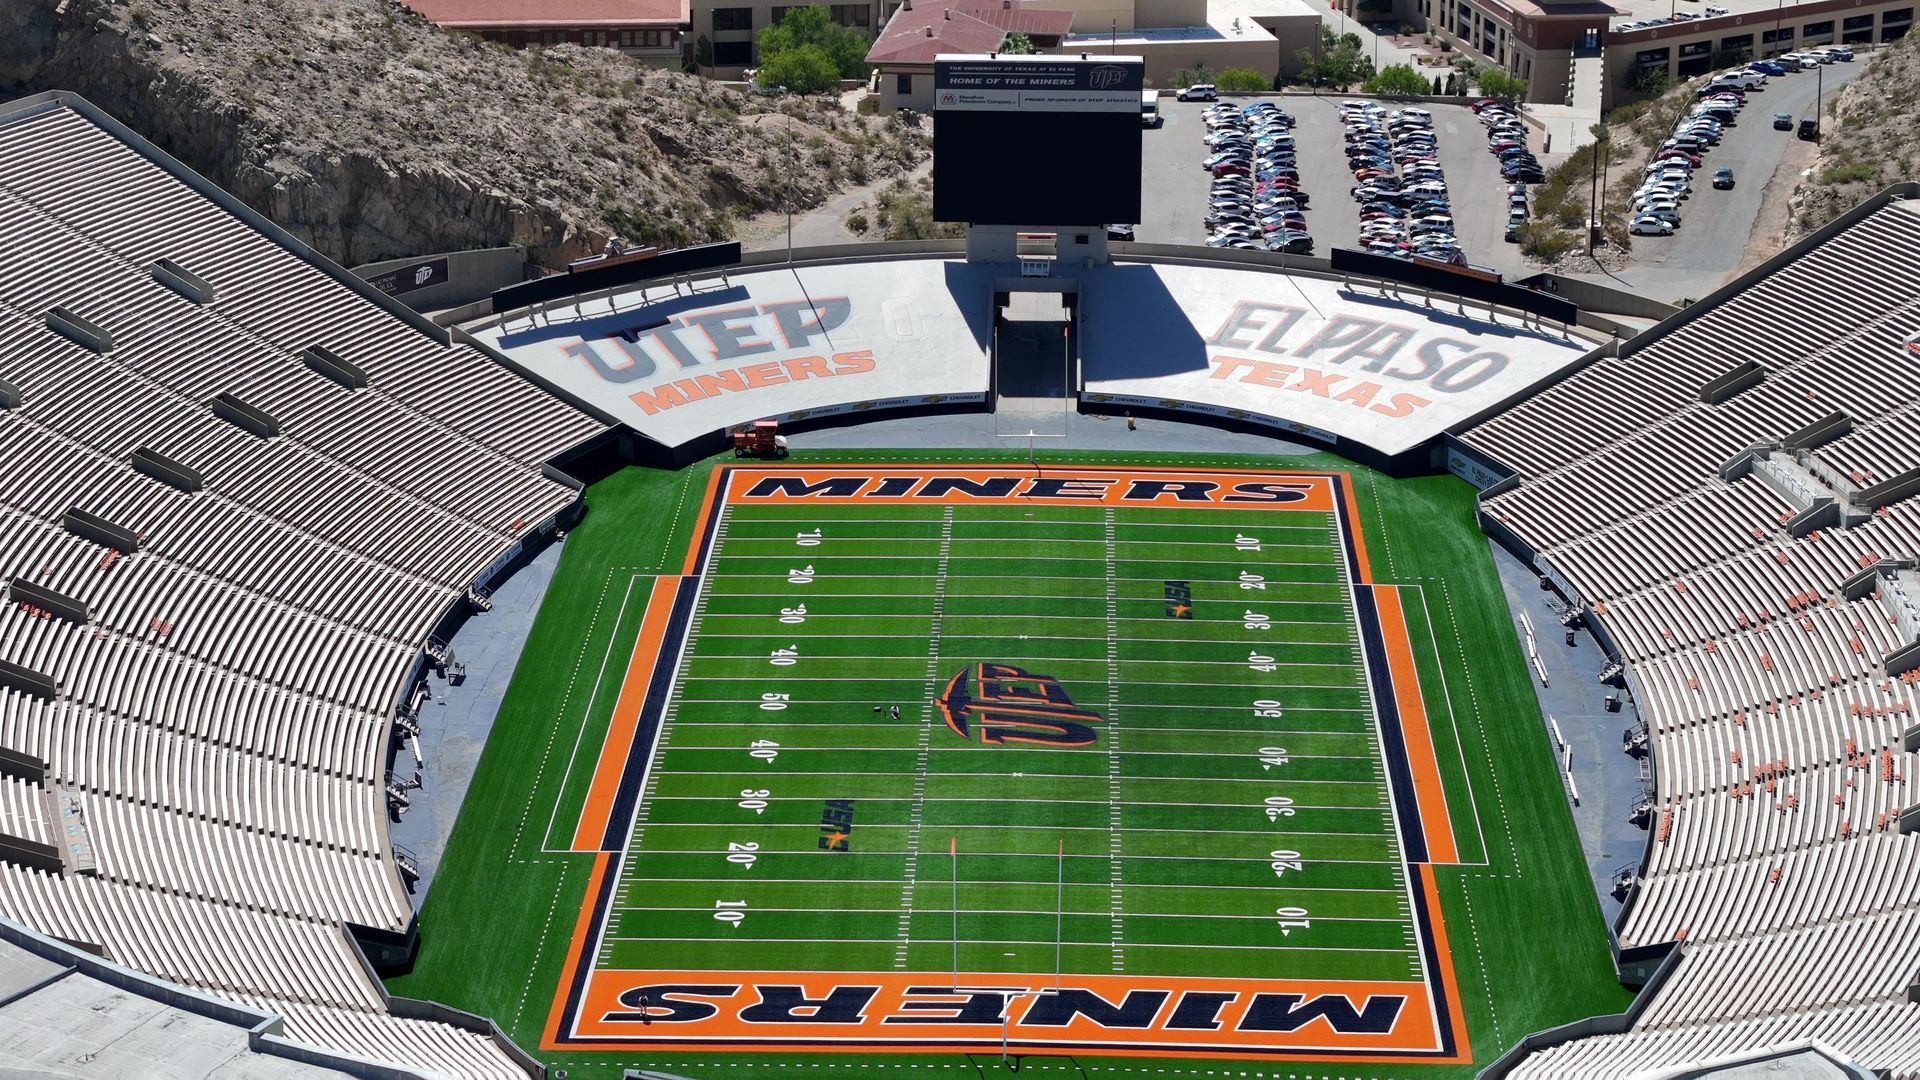 Sun Bowl Stadium, El Paso: An image displaying Sun Bowl Stadium in El Paso. The stadium's architecture, seating arrangements, field, and surrounding area may be visible. The image showcases the size, structure, and setting of the Sun Bowl Stadium, a renowned venue for sporting events and entertainment in El Paso.